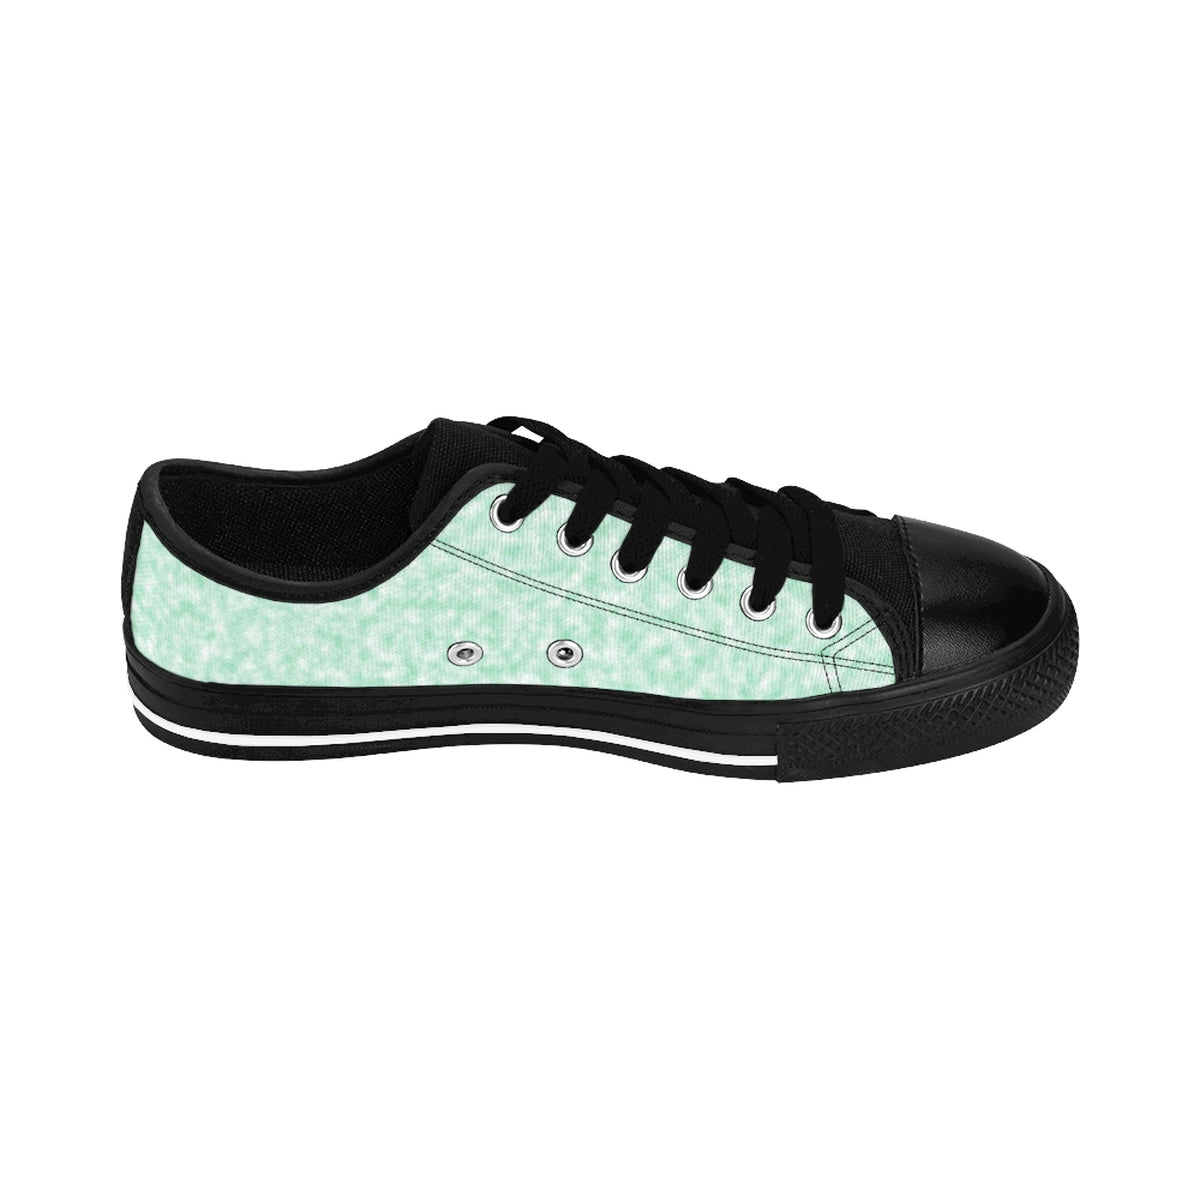 Seafoam Green and White Clouds Women's Sneakers